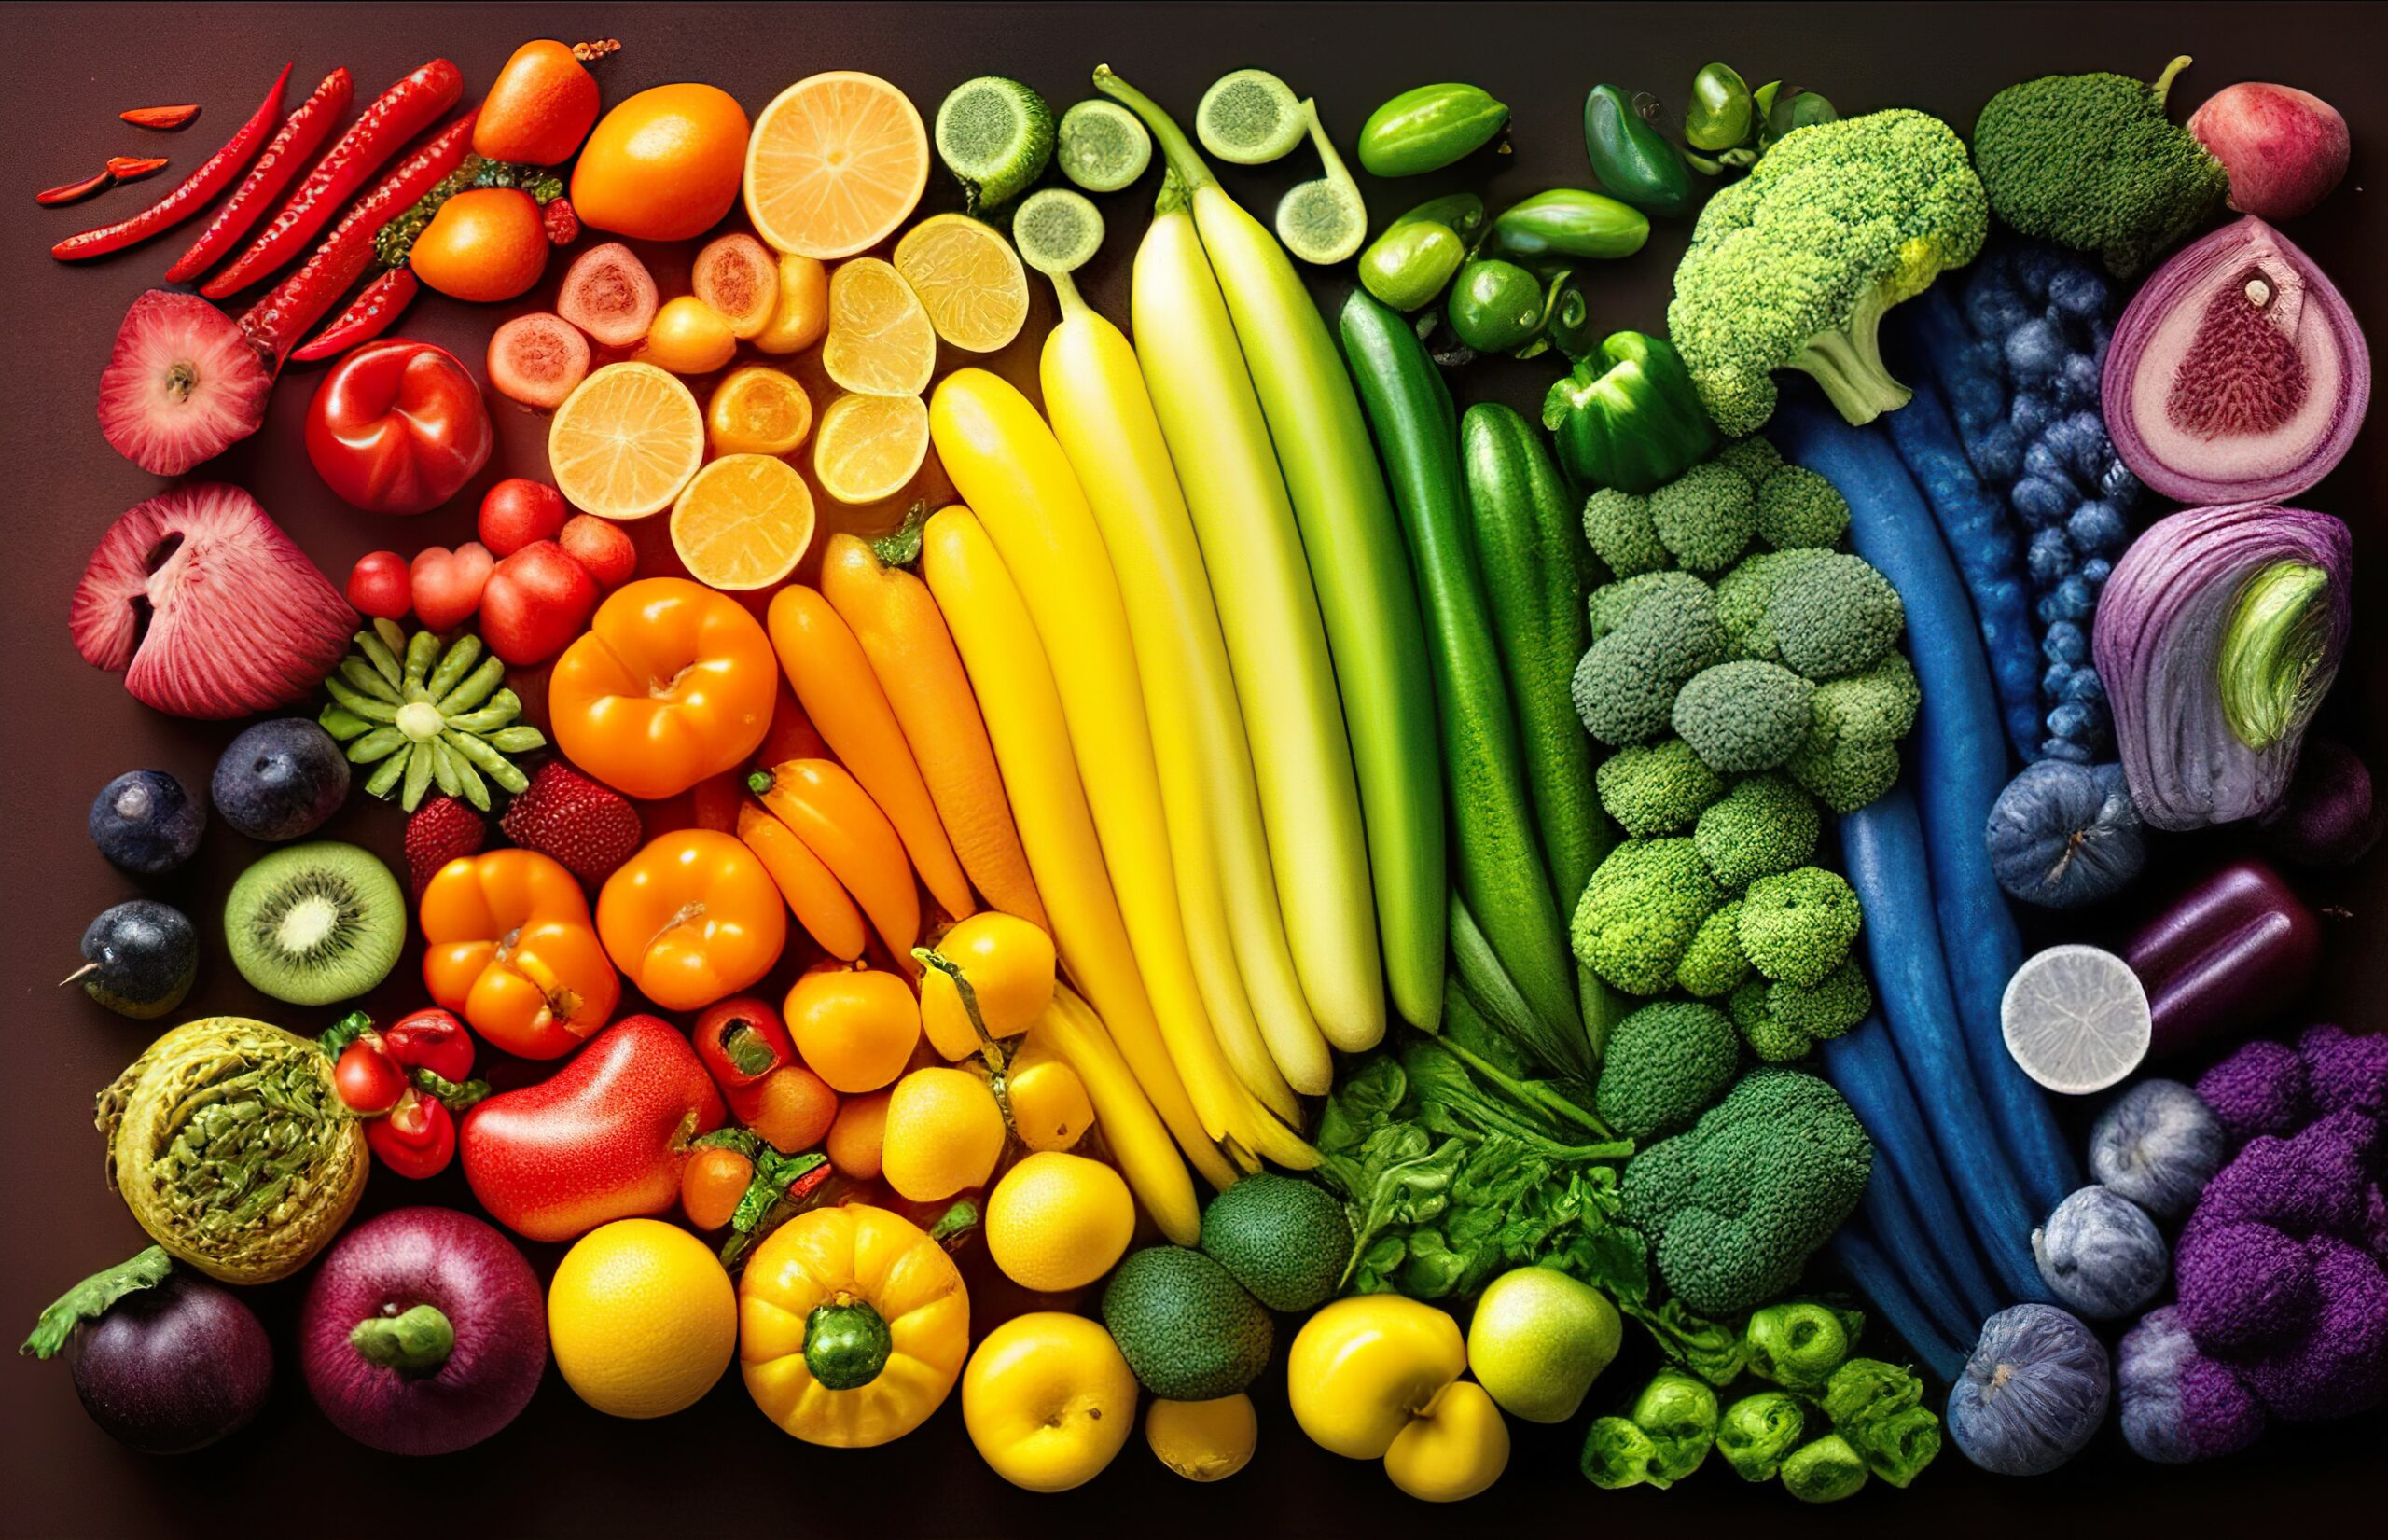 The fruit and vegetable set combines healthy food with bright rainbow tones. AI-generated images